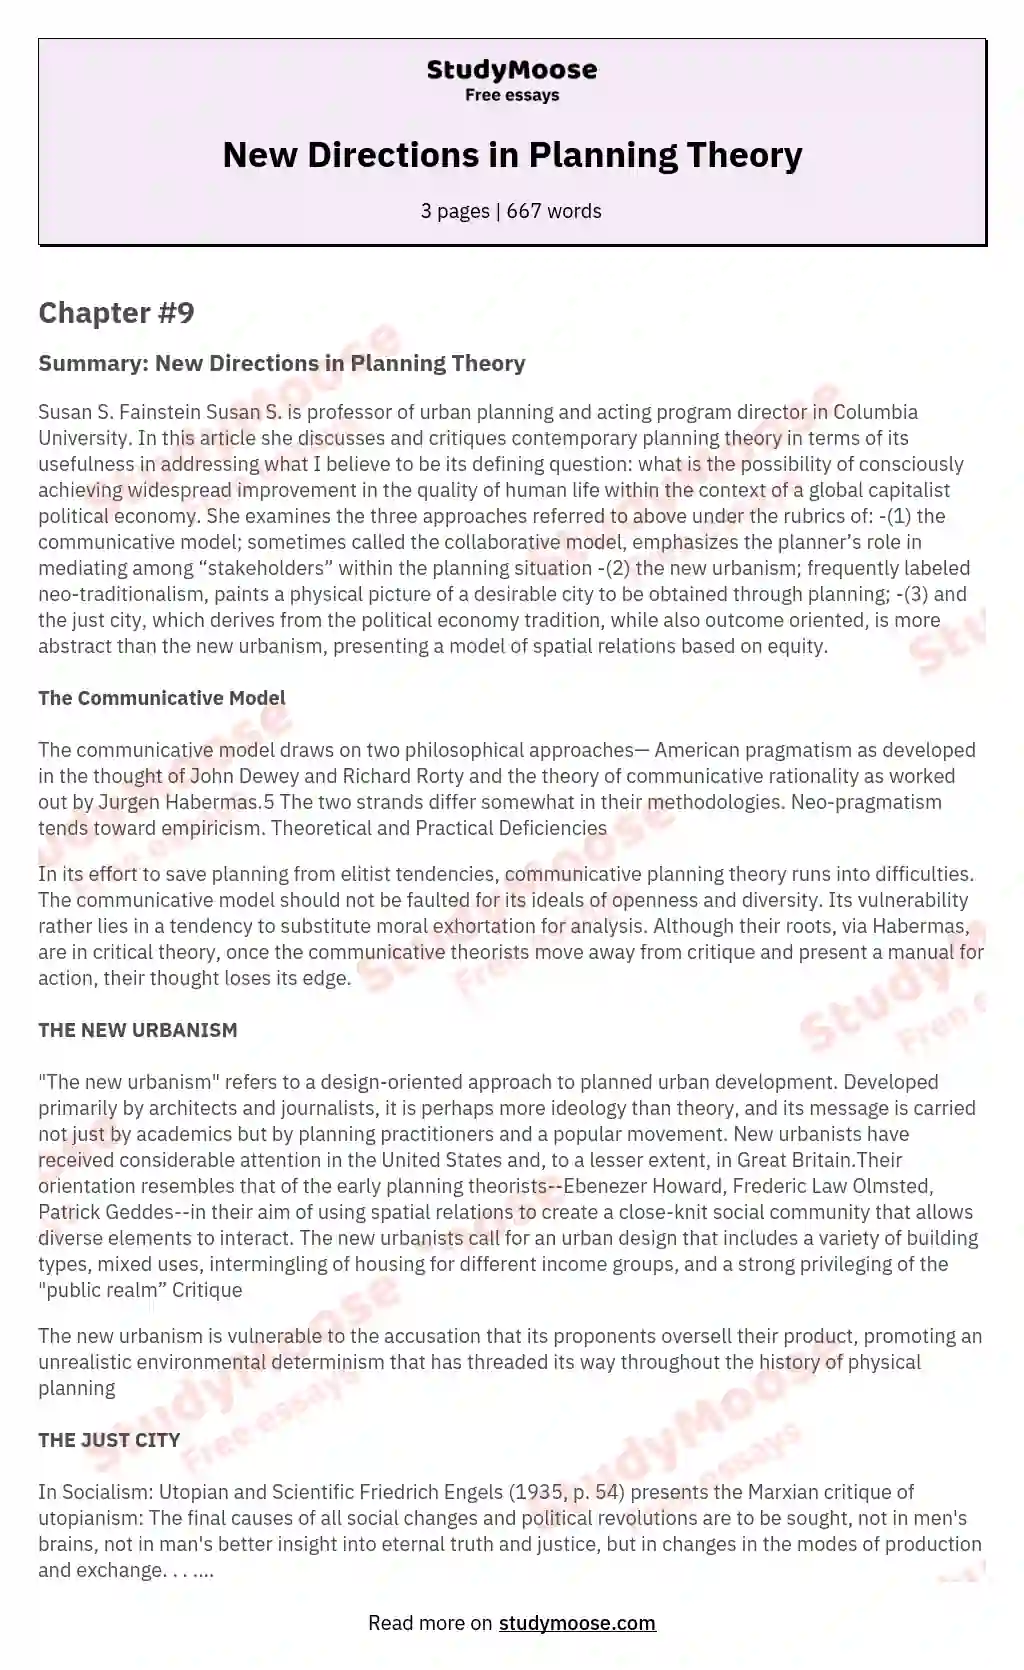 New Directions in Planning Theory essay